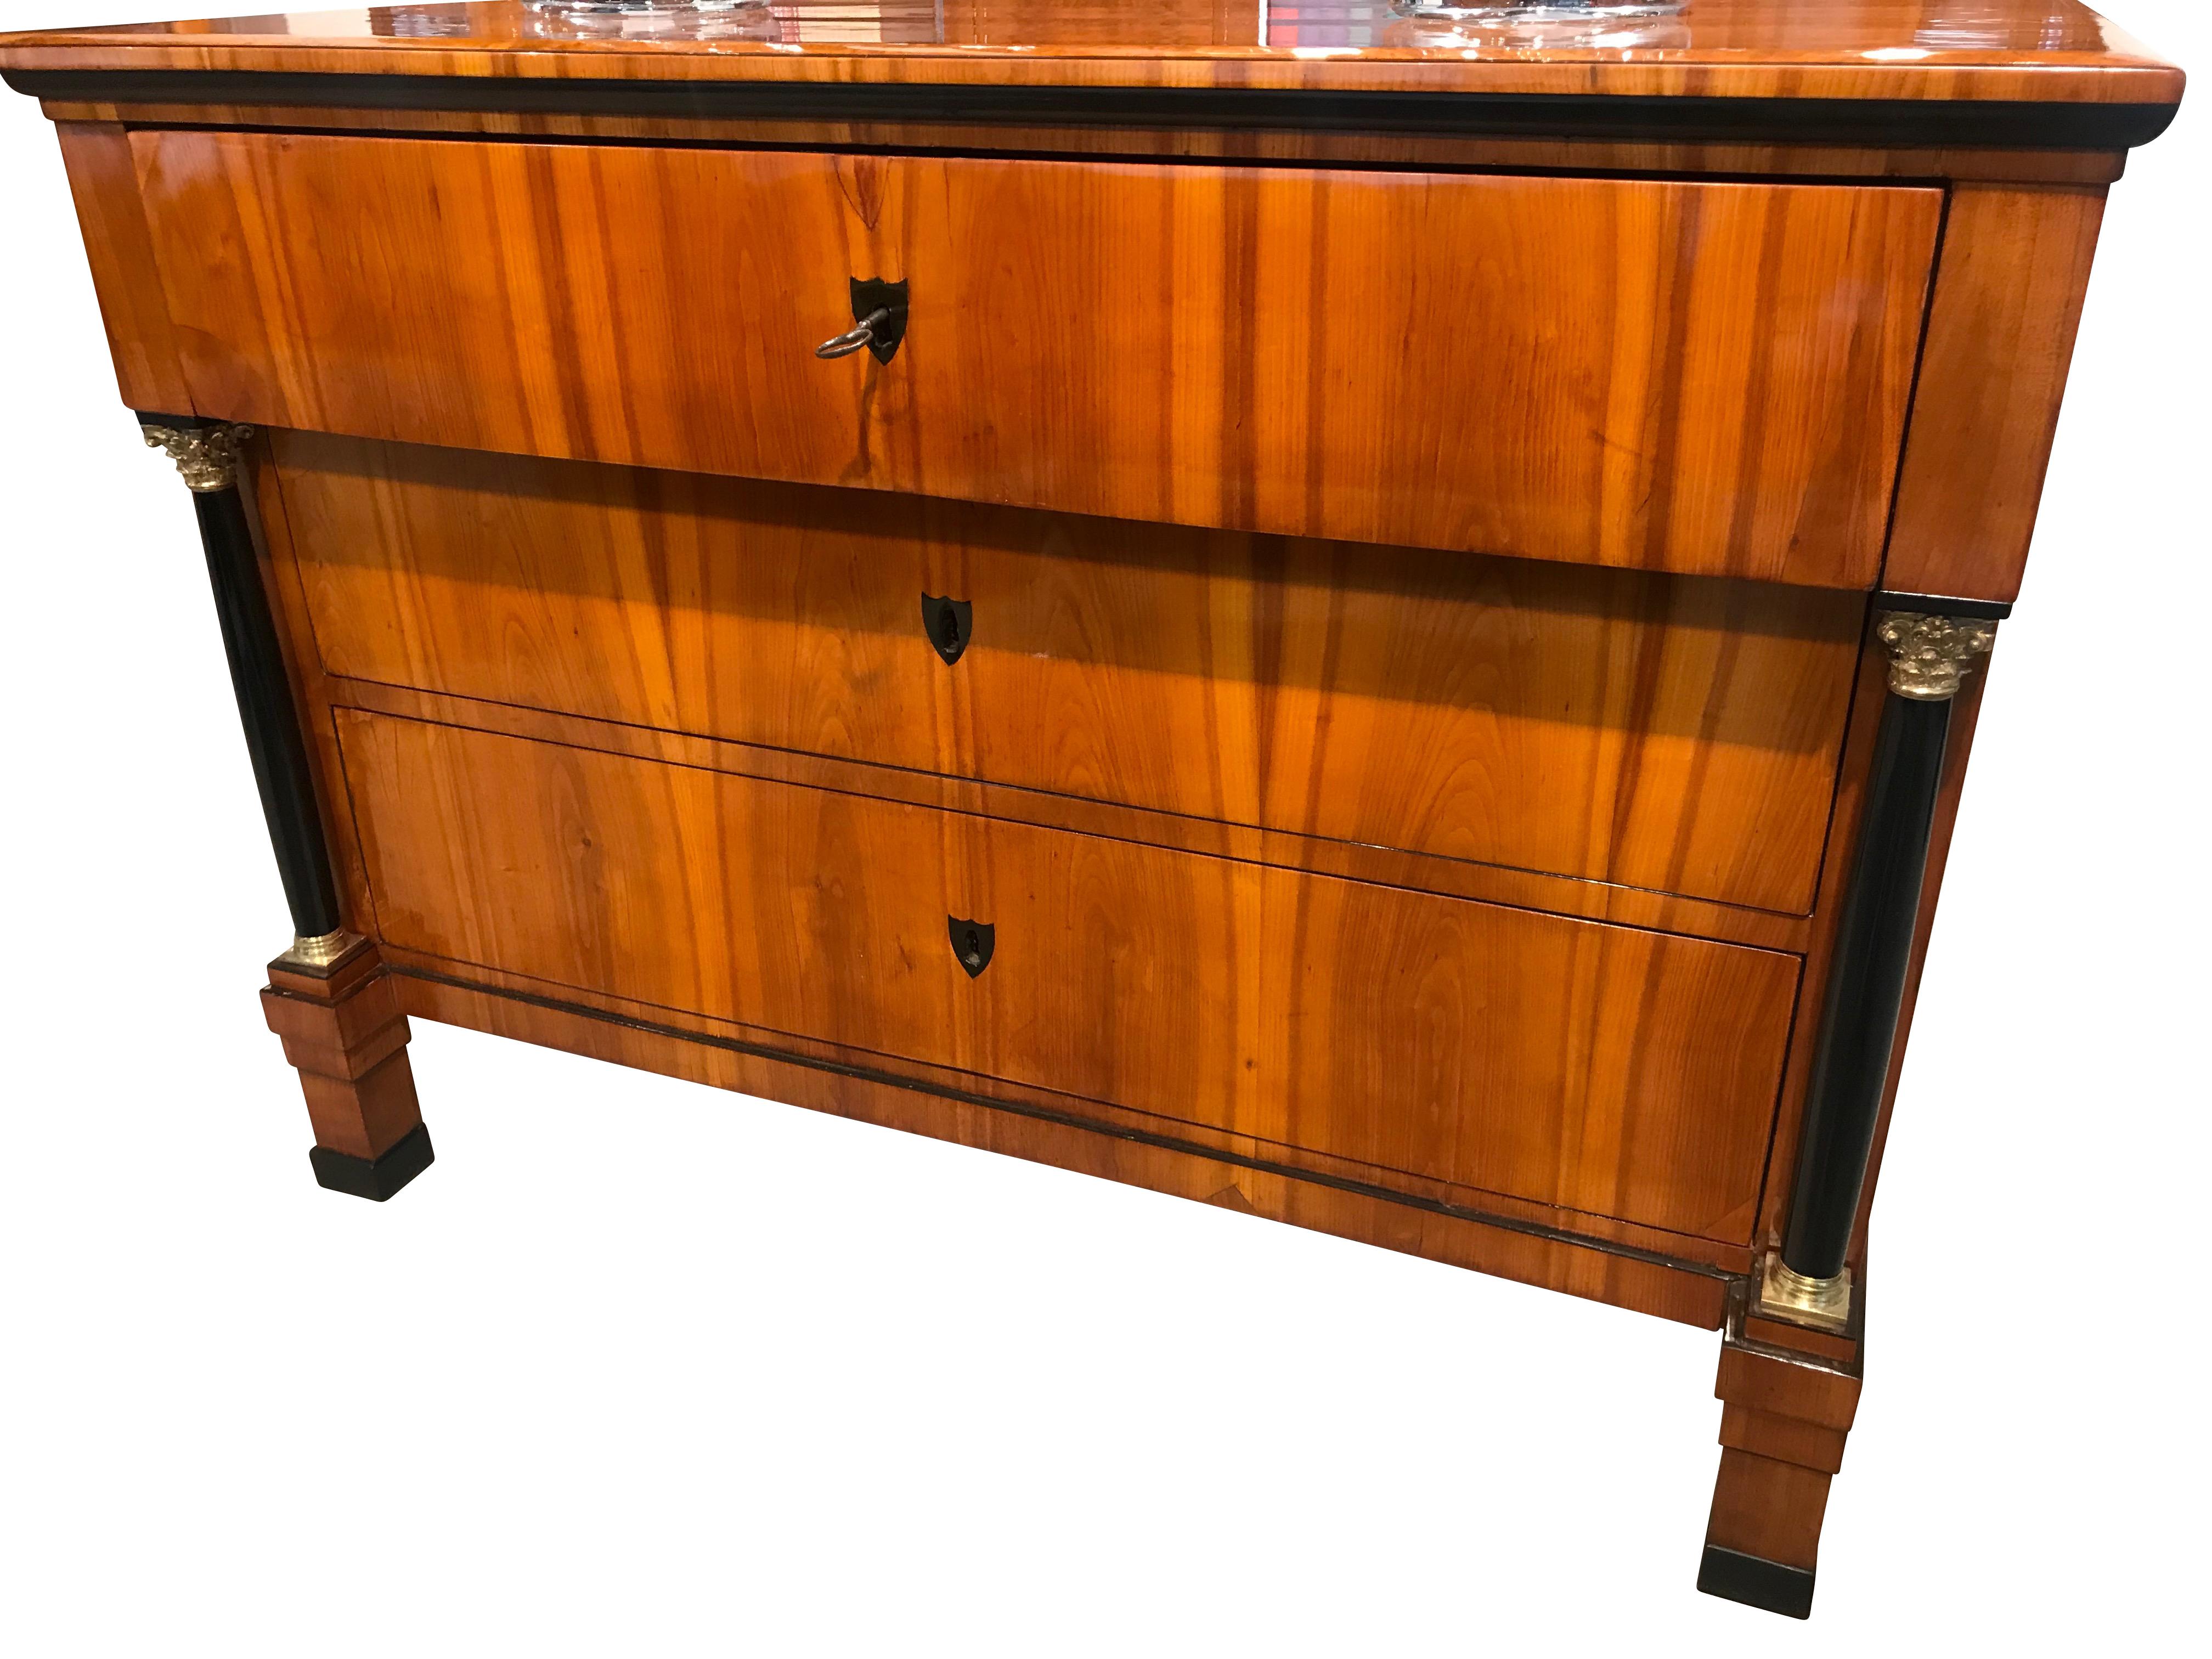 Elegant Biedermeier Commode/Chest of Three Drawers from South Germany around 1825.
The commode has two ebonized full columns with corinthian brass capitals and bases.
Everything including the locks is original. 

The cherry veneer is very